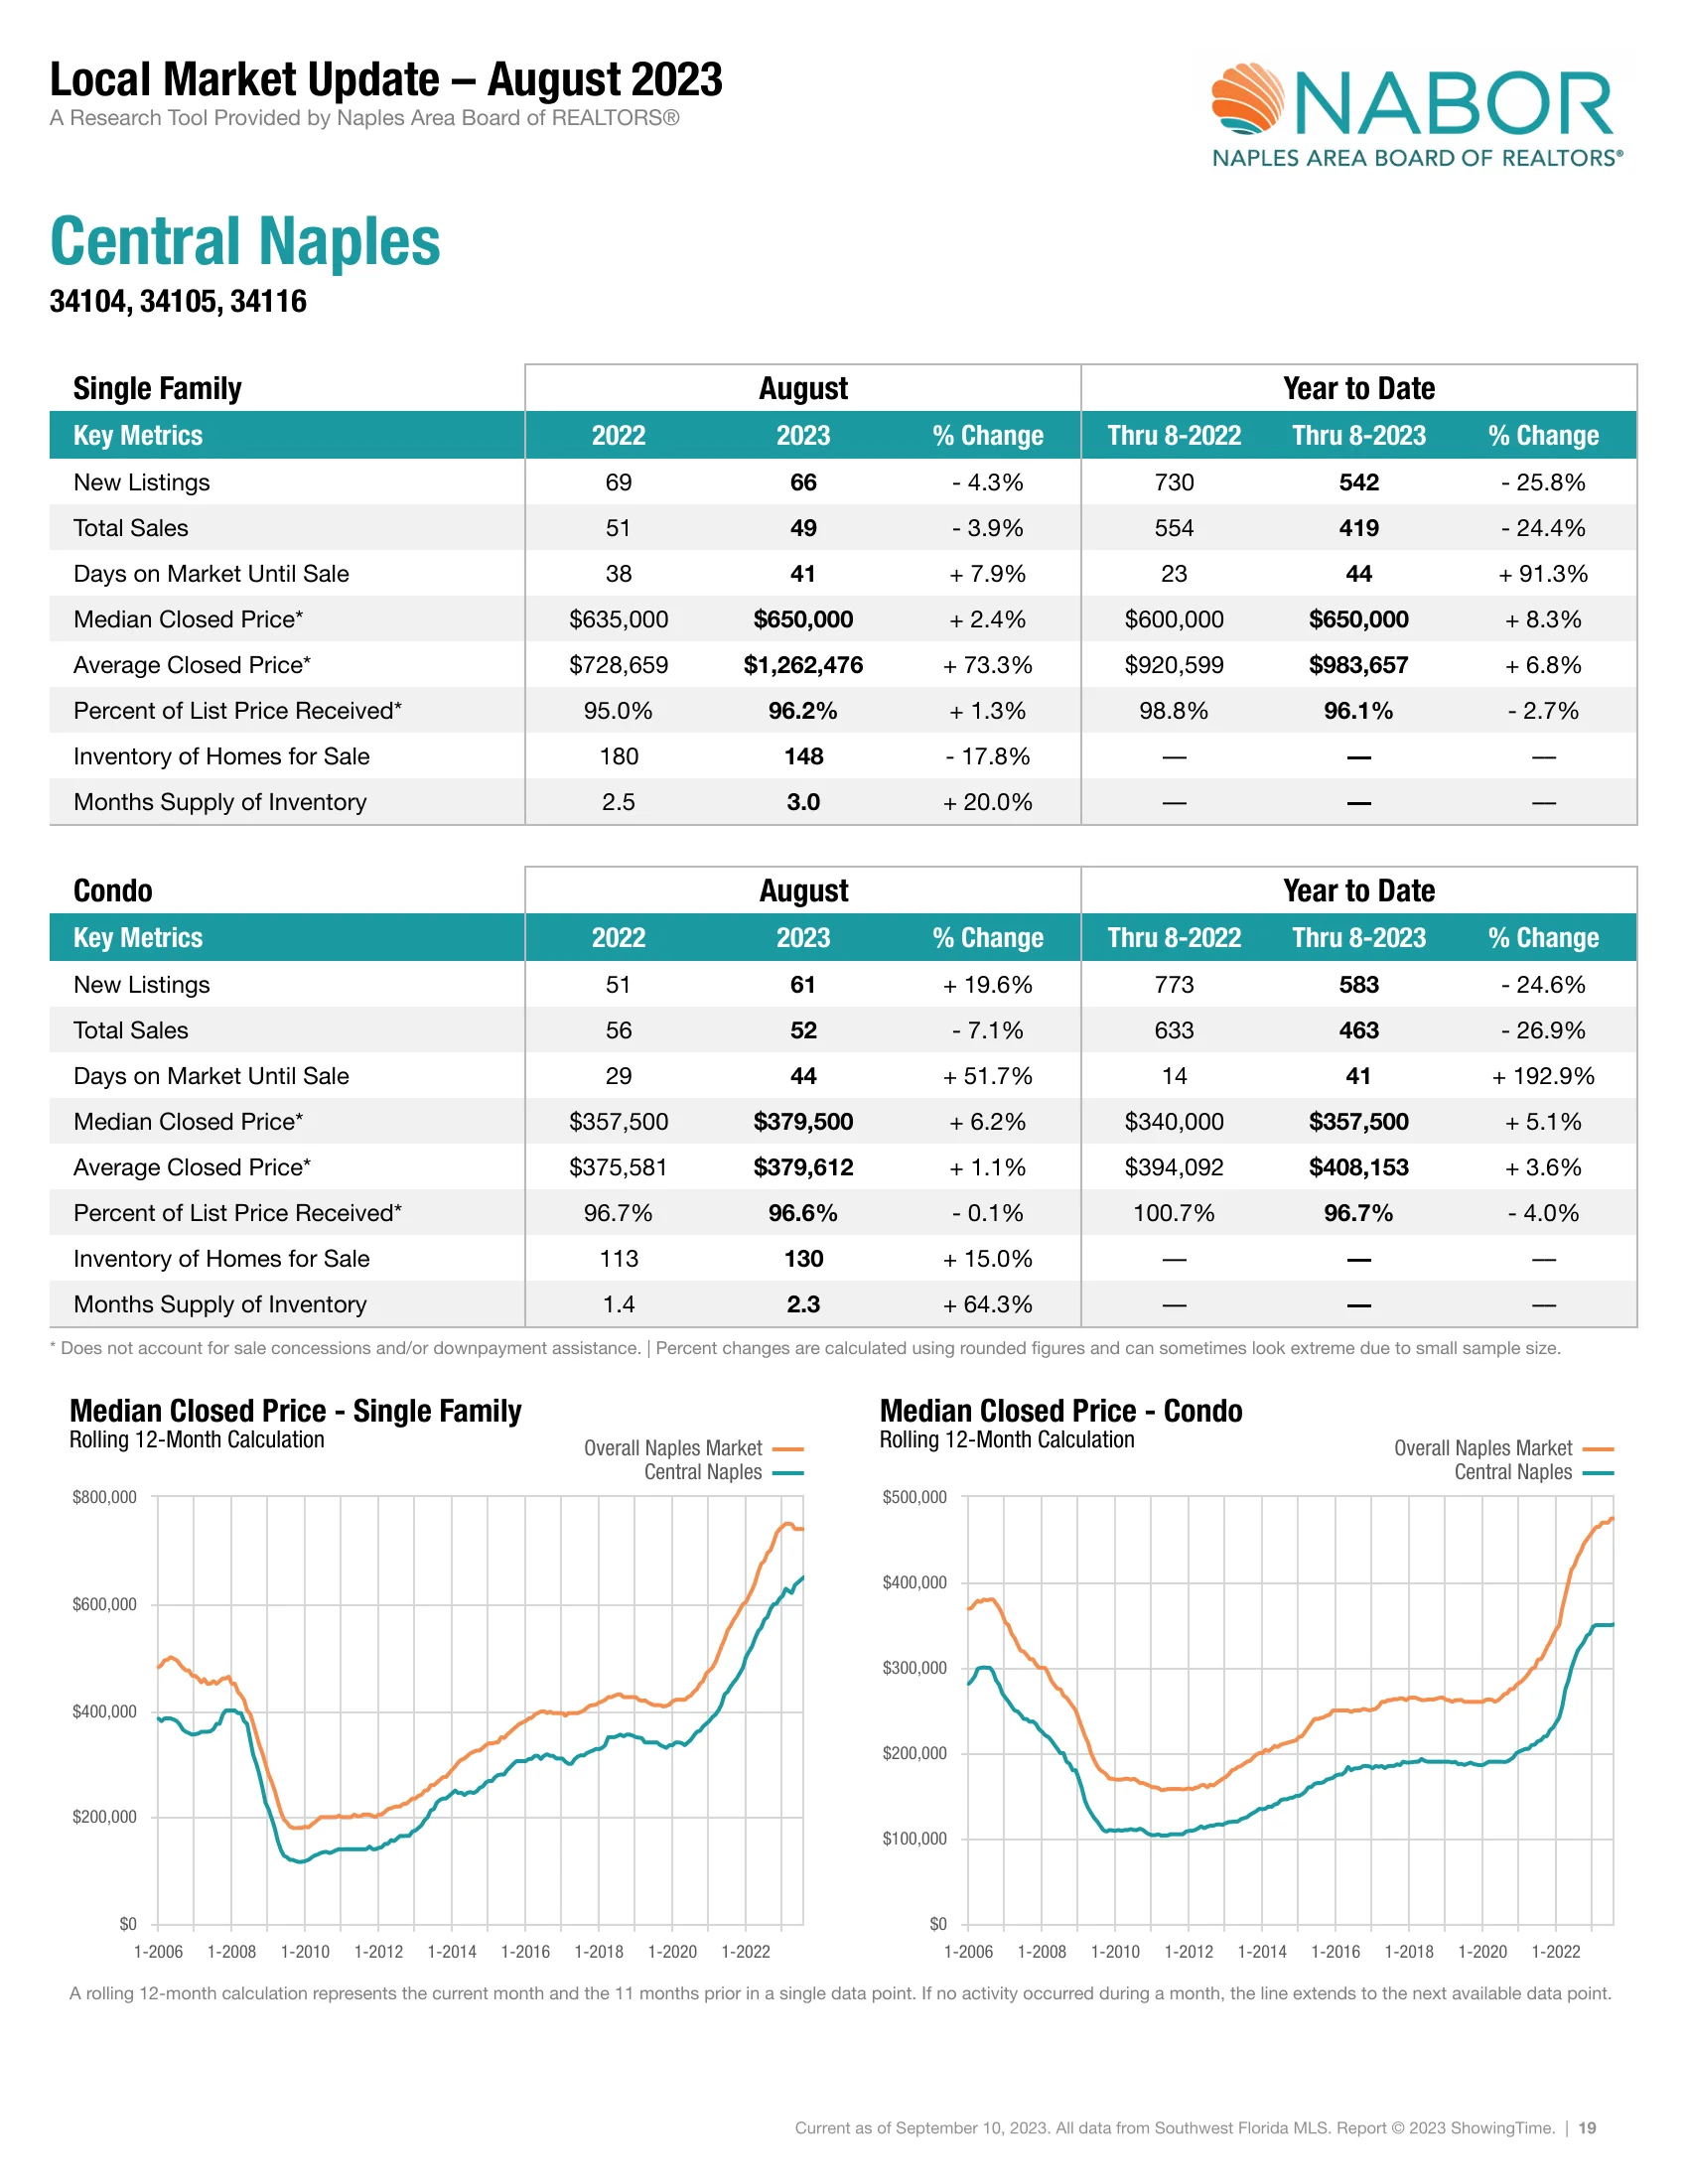 August 2023 Central Naples Local Market Update 19